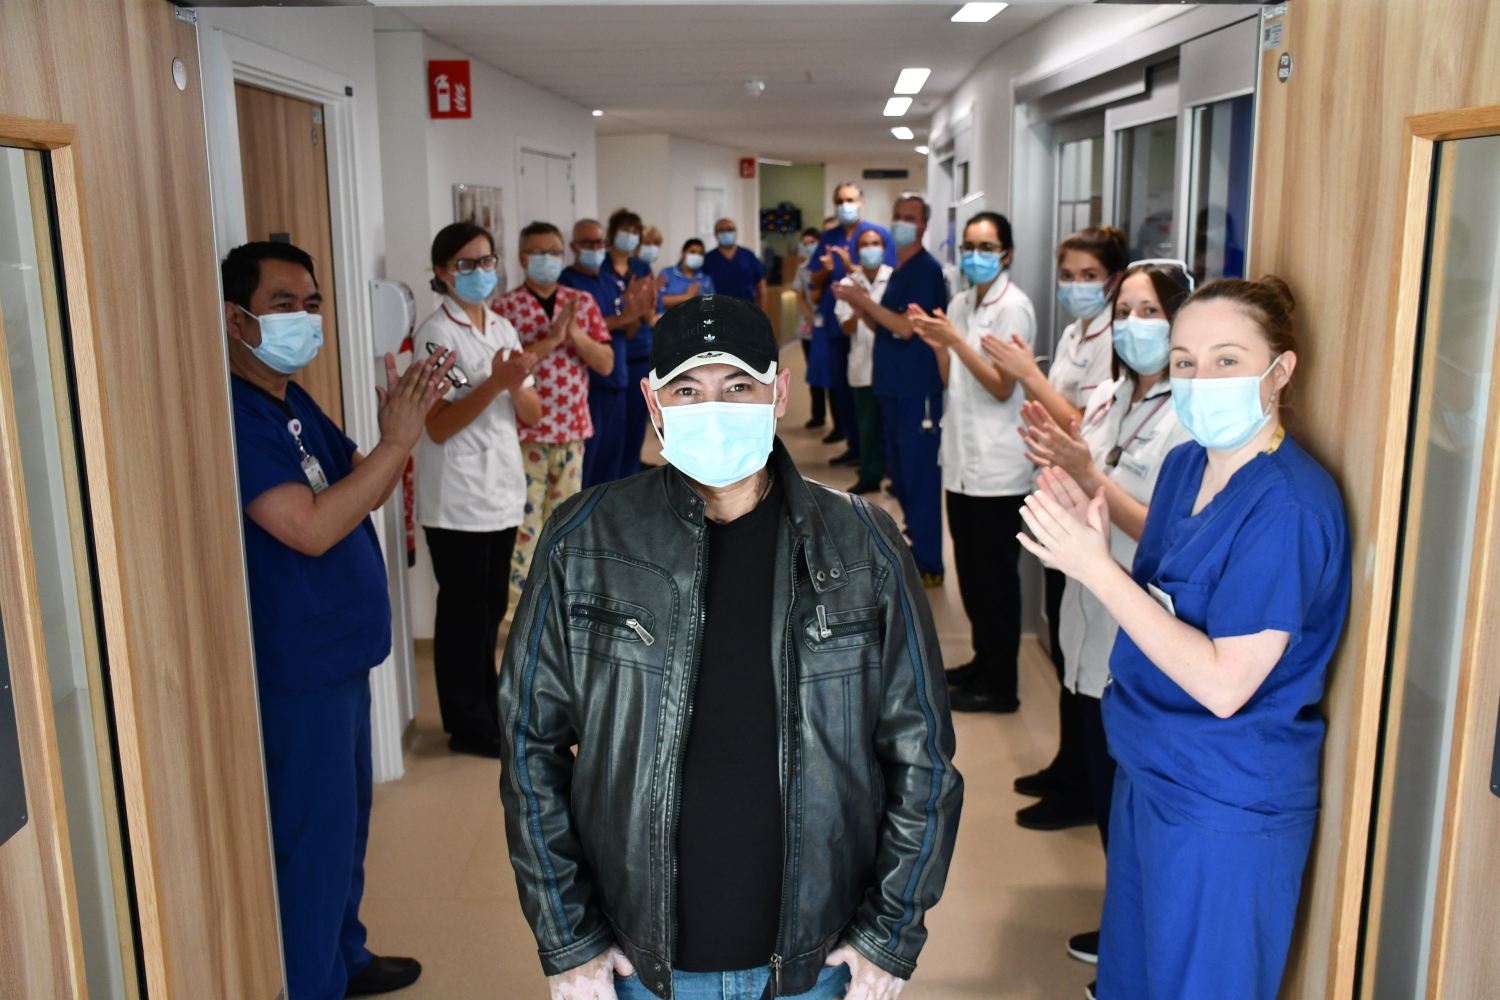 A man wearing a baseball cap, leather jacket and mask stands in a corridor, while staff behind him clap.